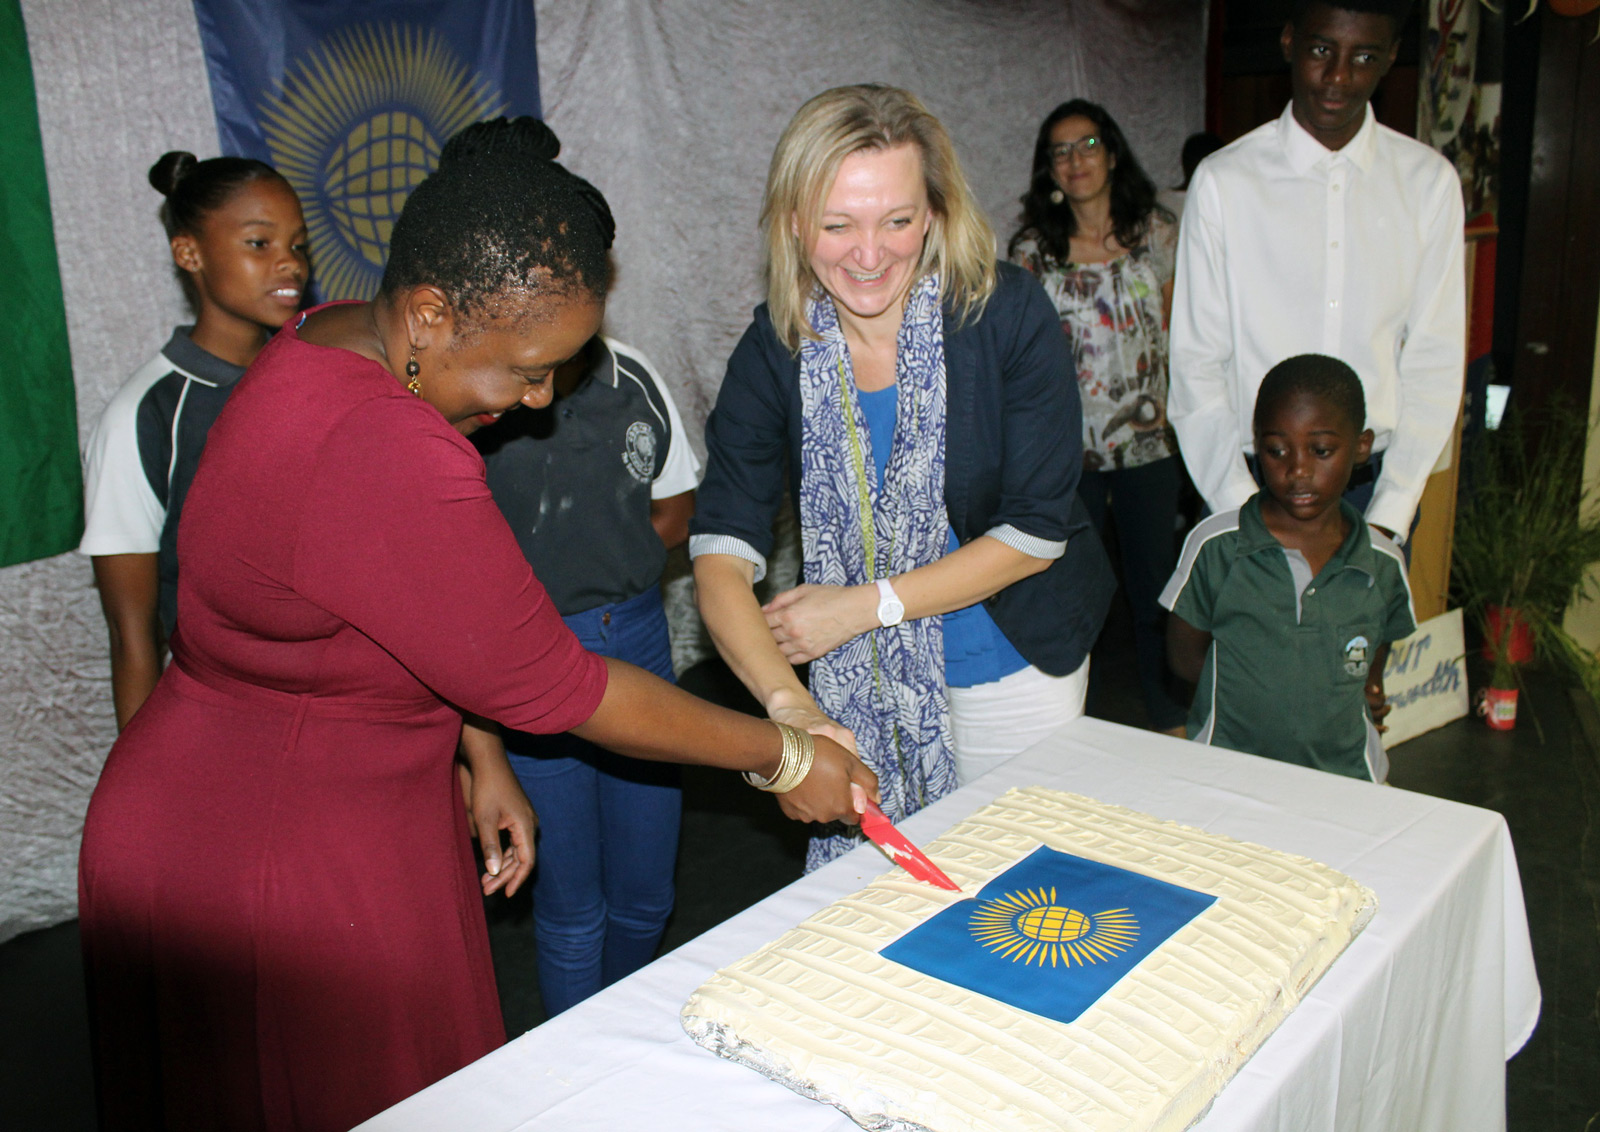 Cutting a Commonwealth cake